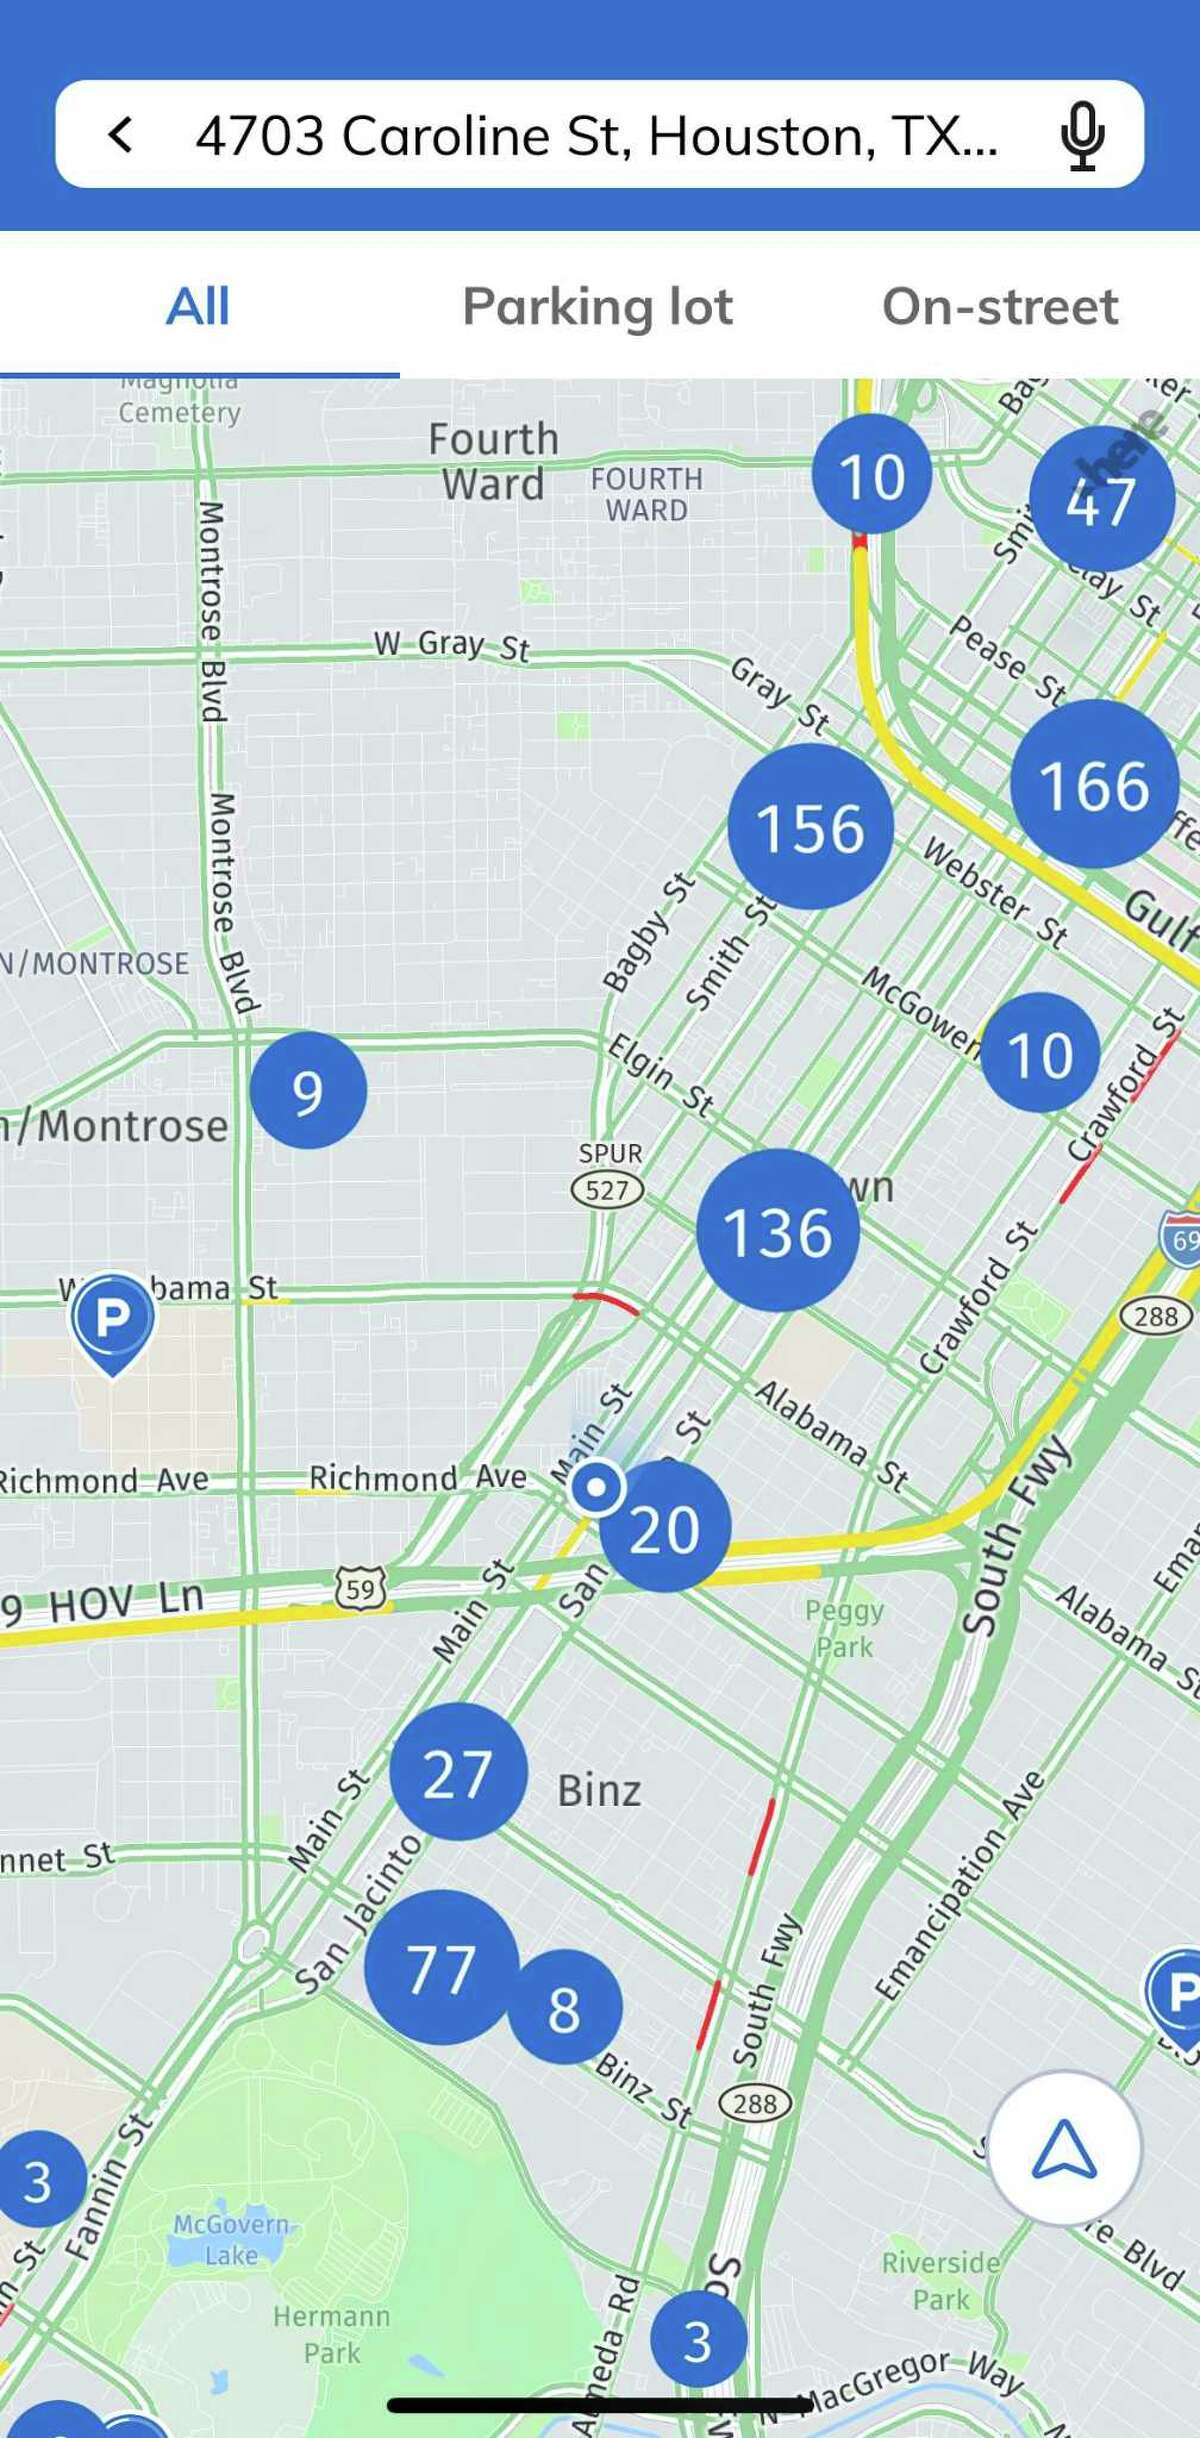 The new Houston ConnectSmart app allows are travelers to plan trips and have information about transit options, parking availability and other functions.